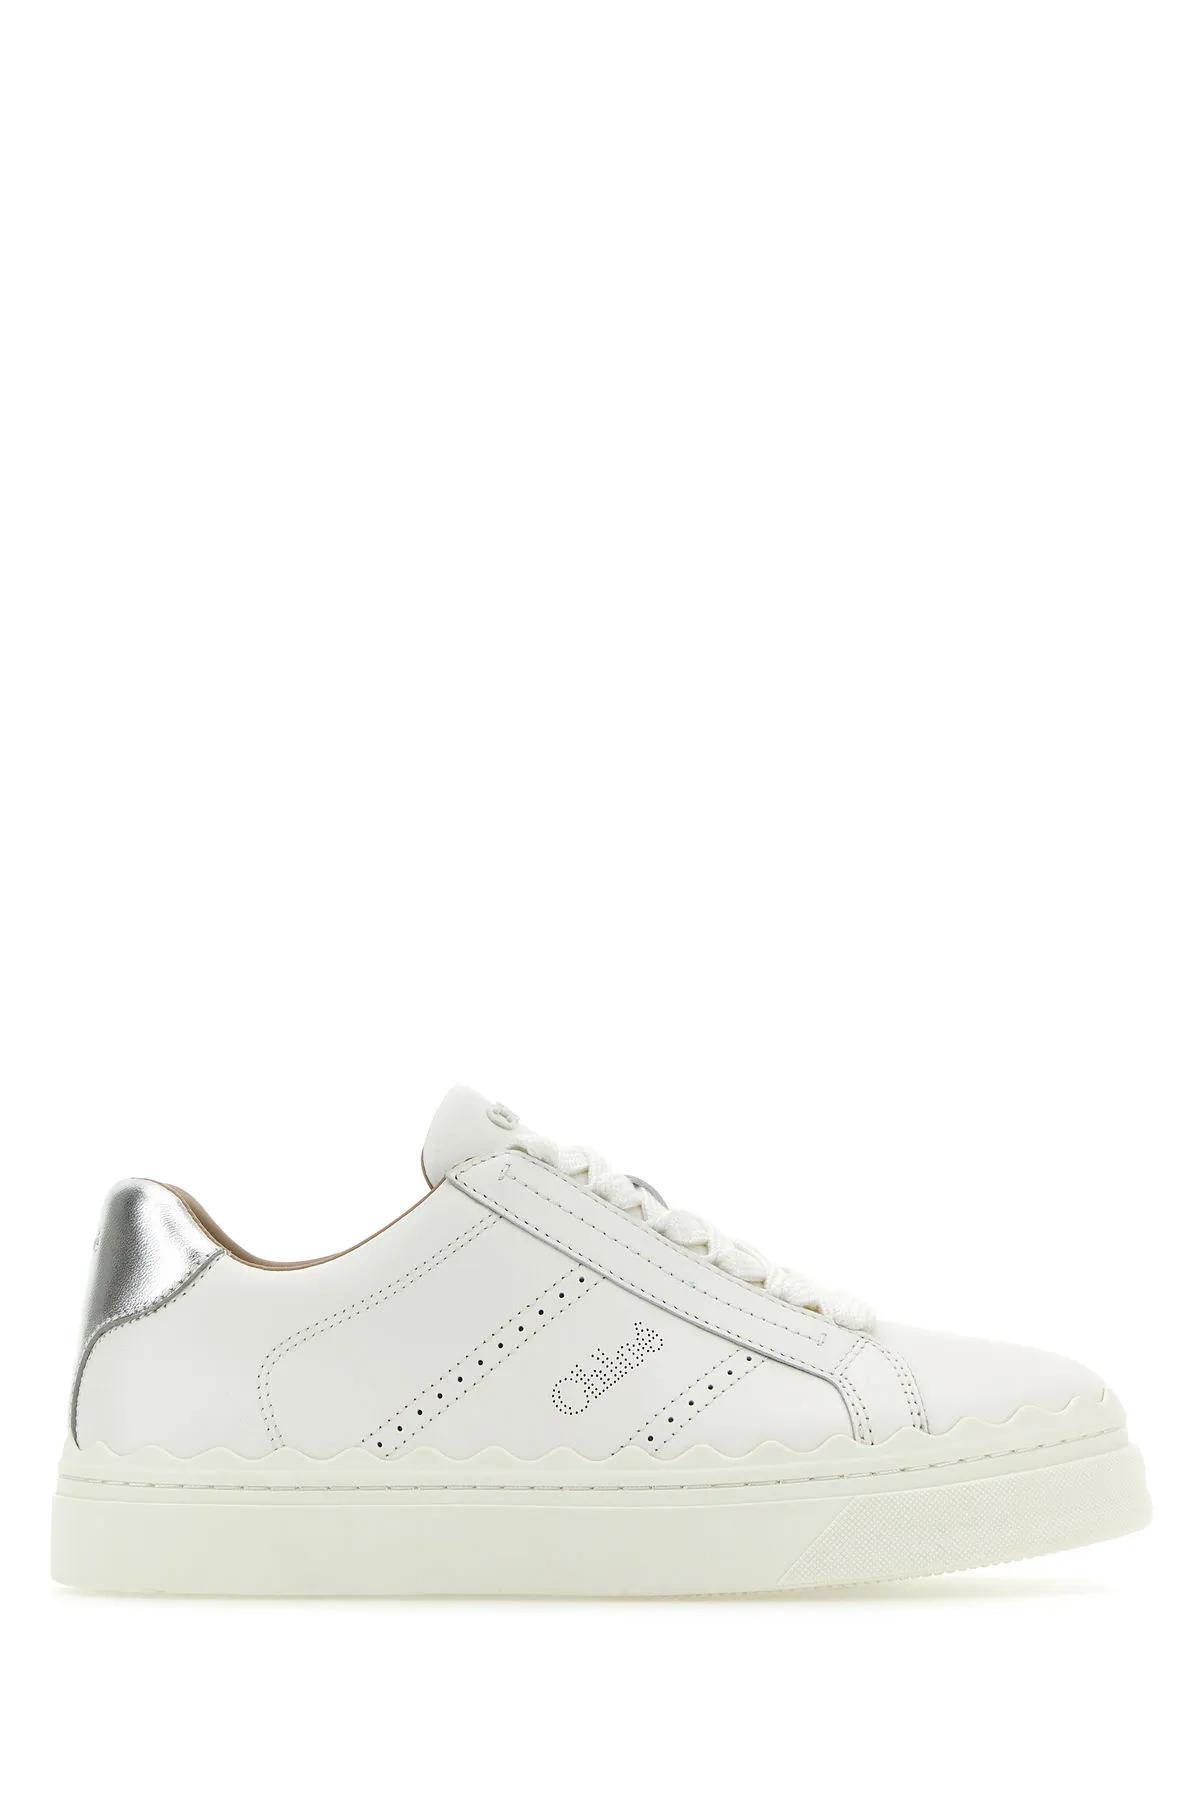 Chloé White Leather Lauren Sneakers